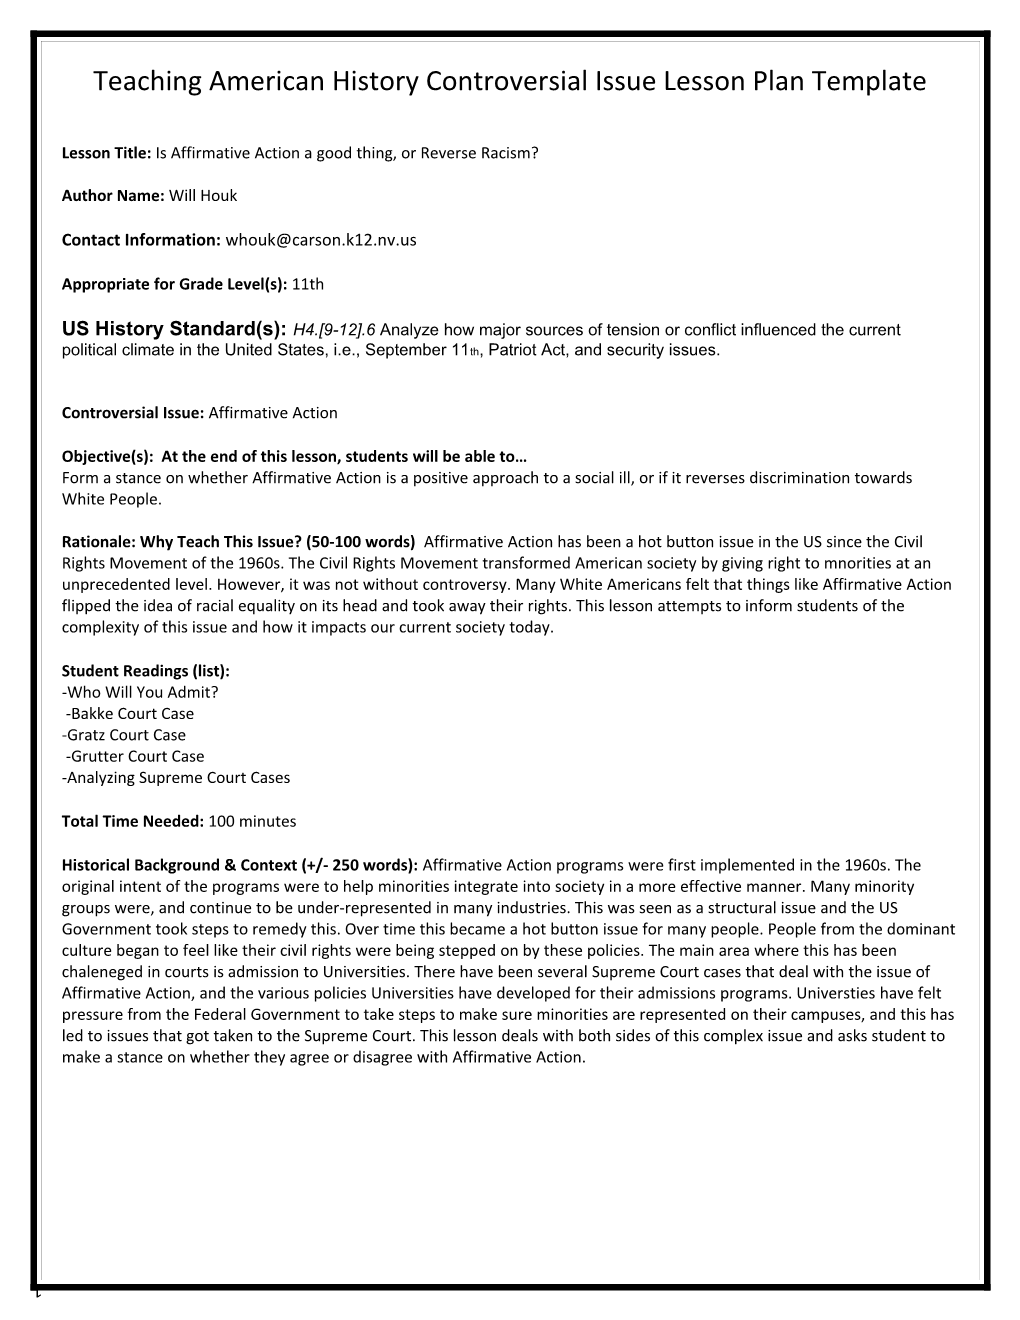 Teaching American History Controversial Issue Lesson Plan Template